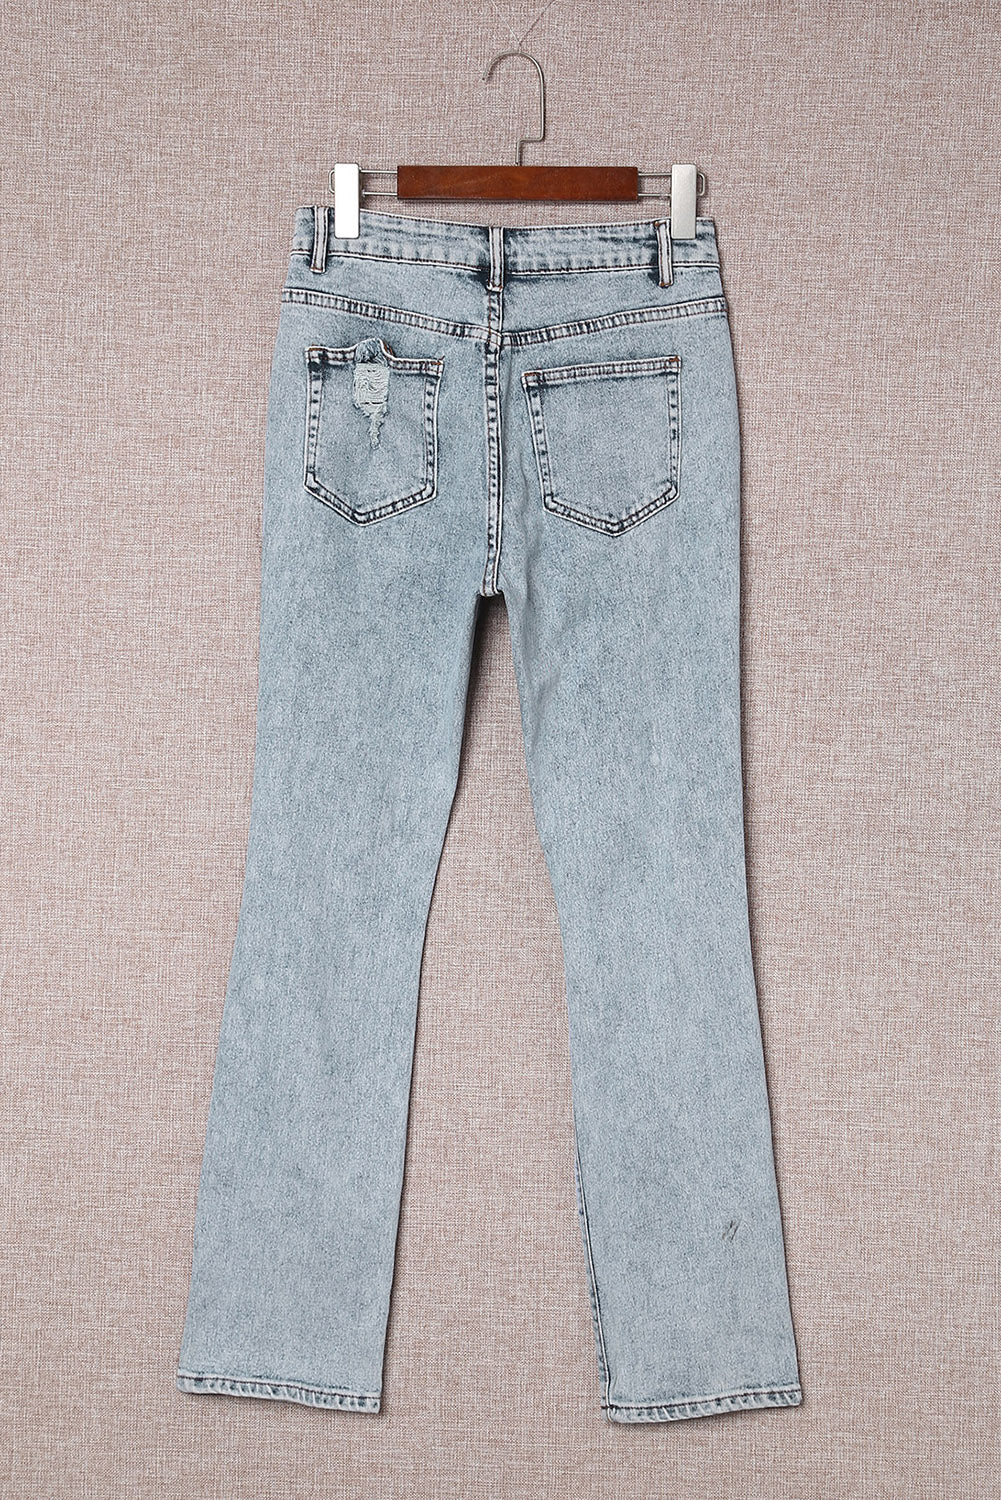 Sky Blue Fading Wash Distressed Casual Jeans Jeans JT's Designer Fashion